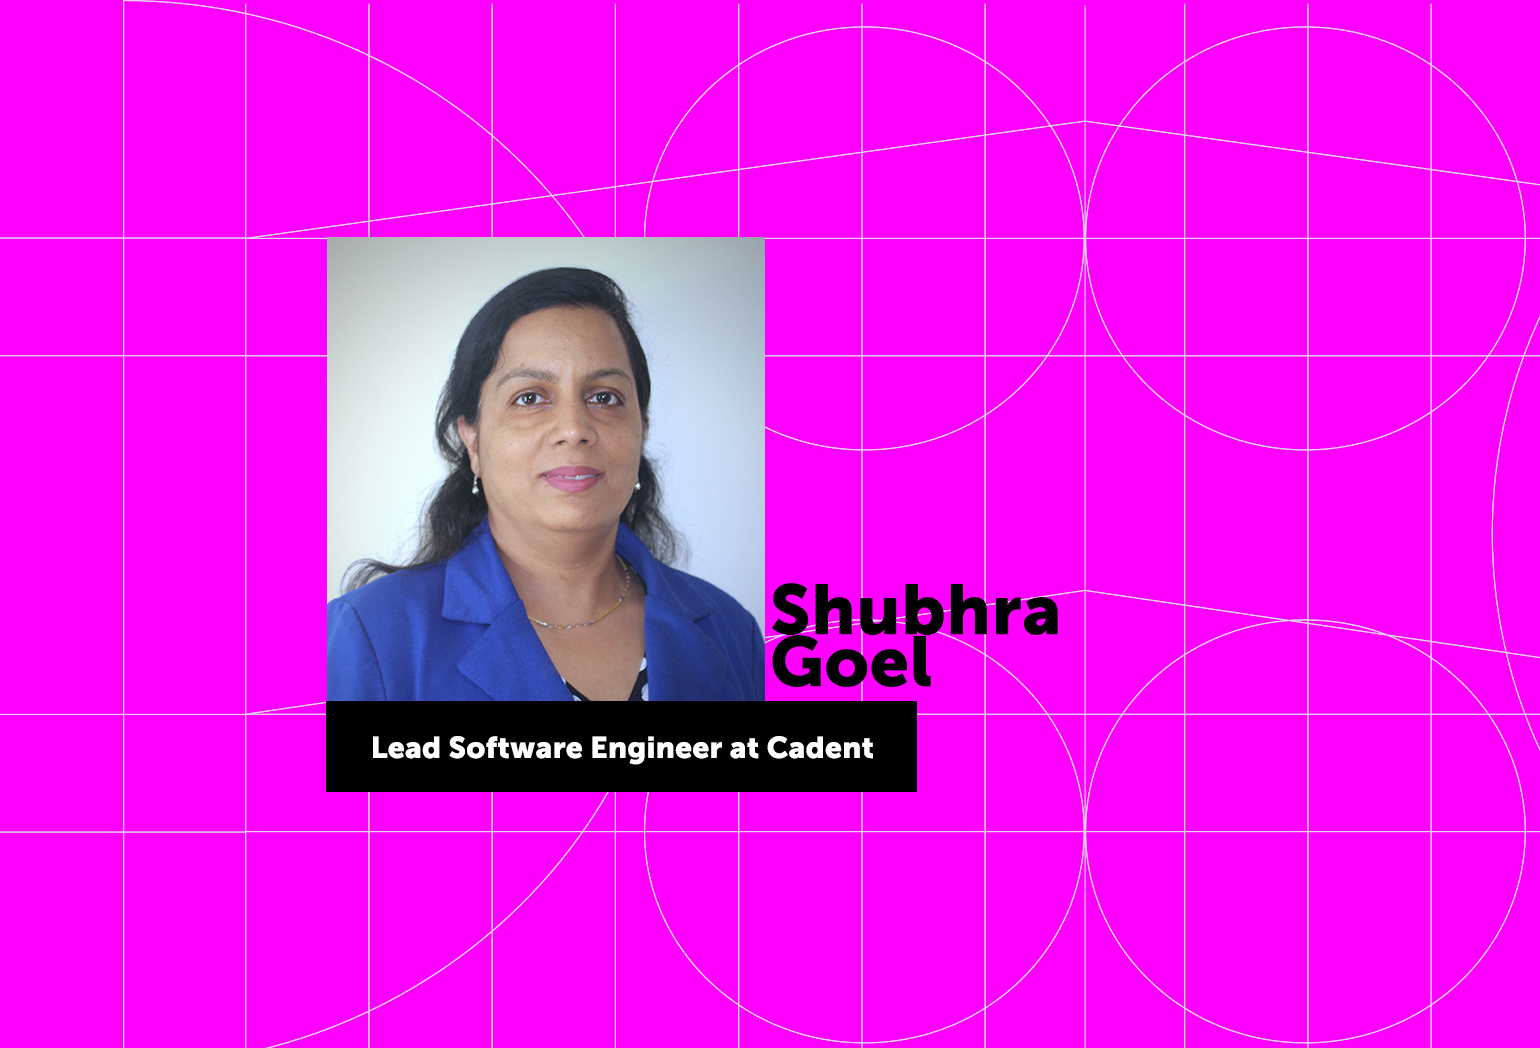 Celebrating International Day of Women and Girls in Science with Shubhra Goel